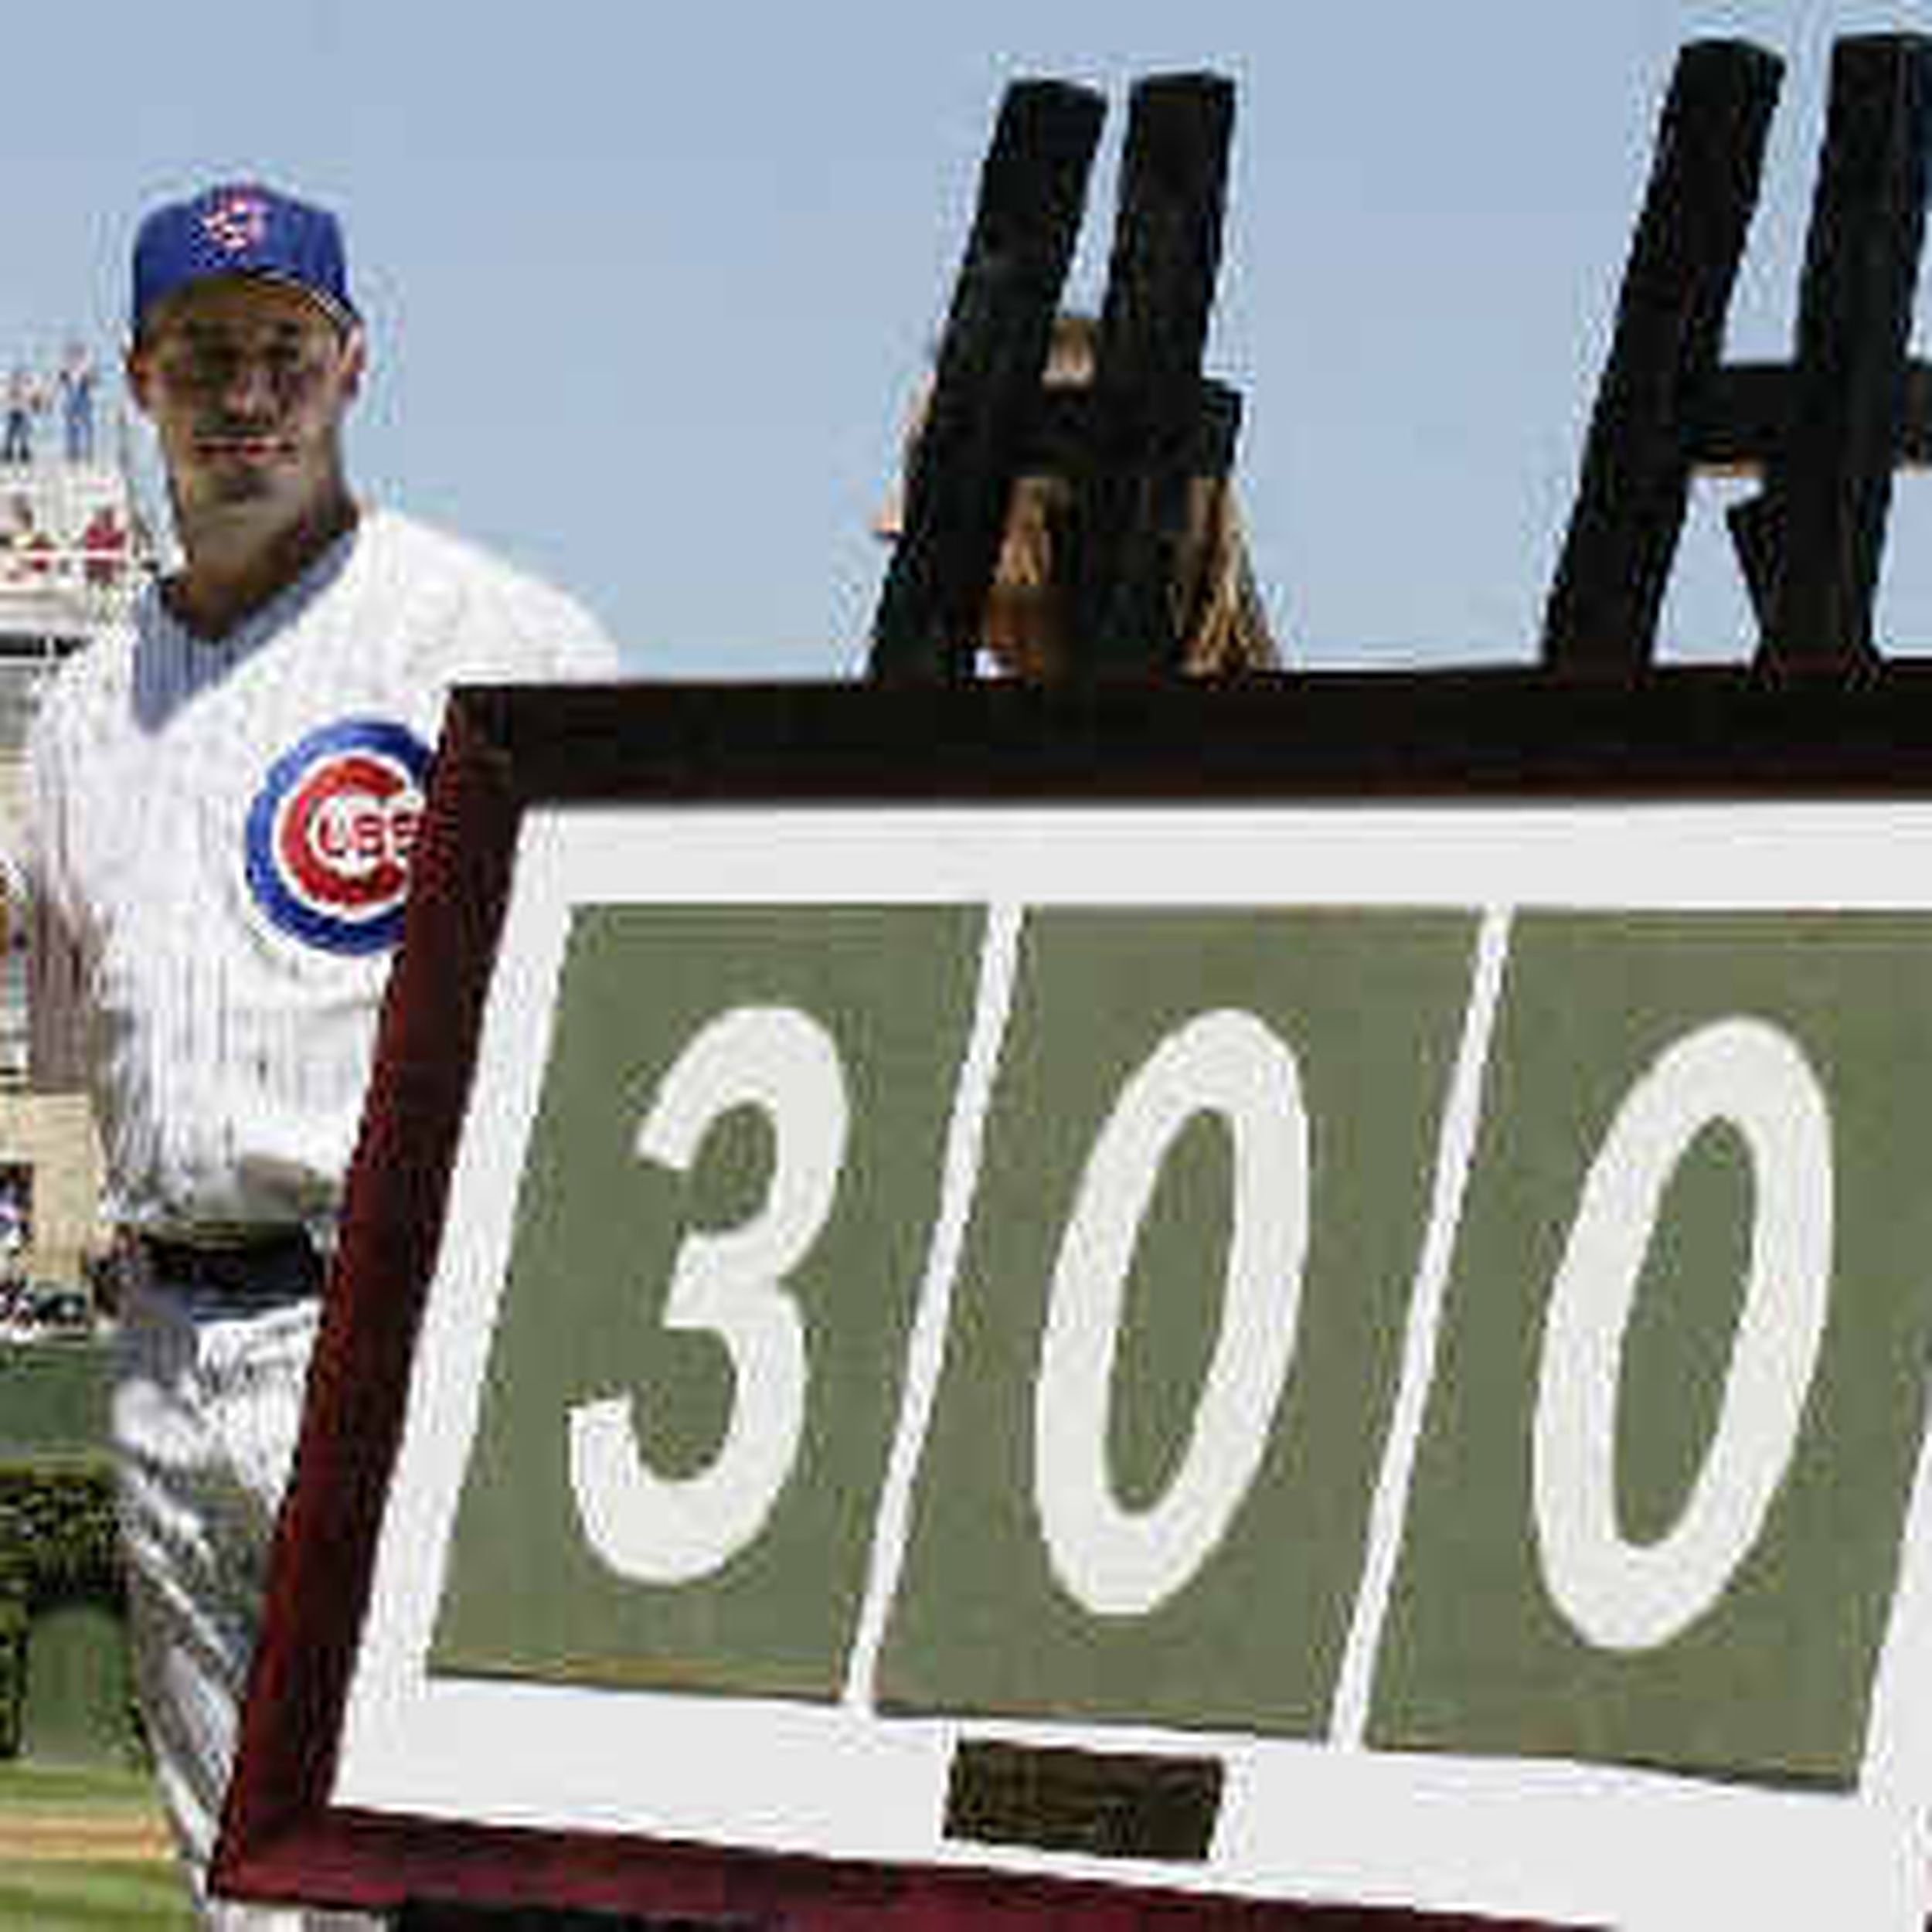 Cubs honor Maddux for 300th win